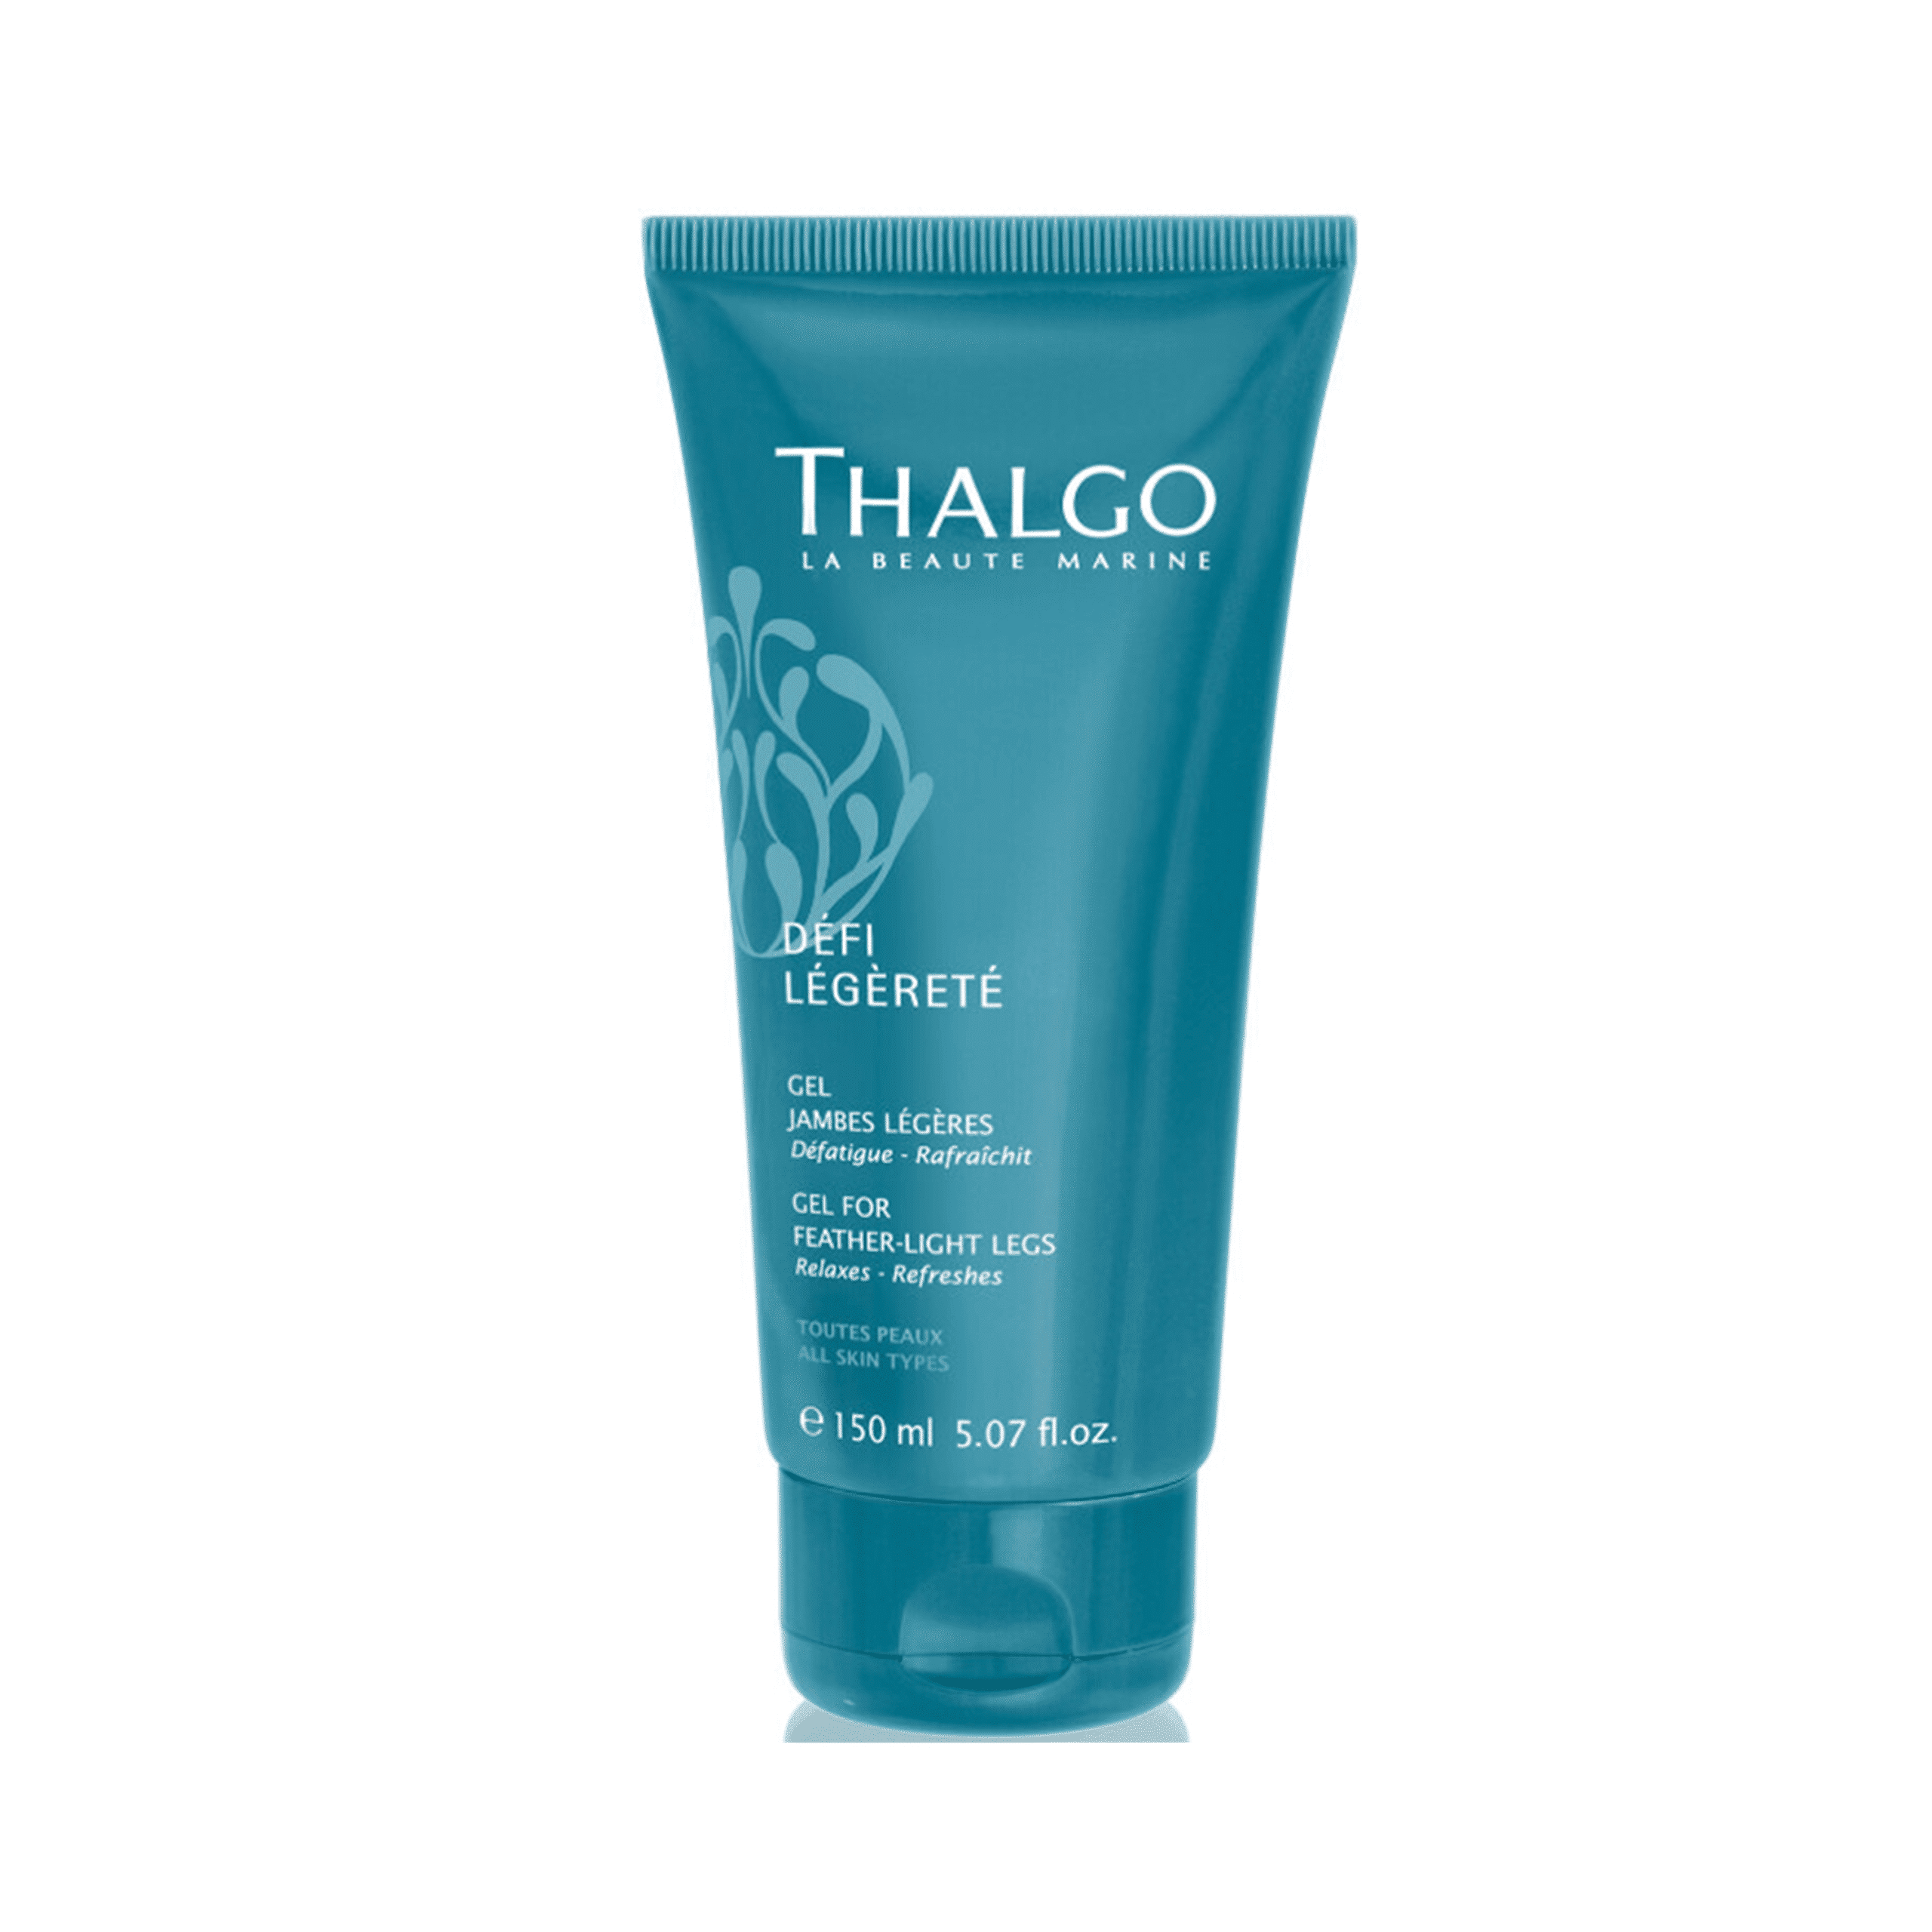 Thalgo Well Being Slimming Gel Feather Light Legs 150ml